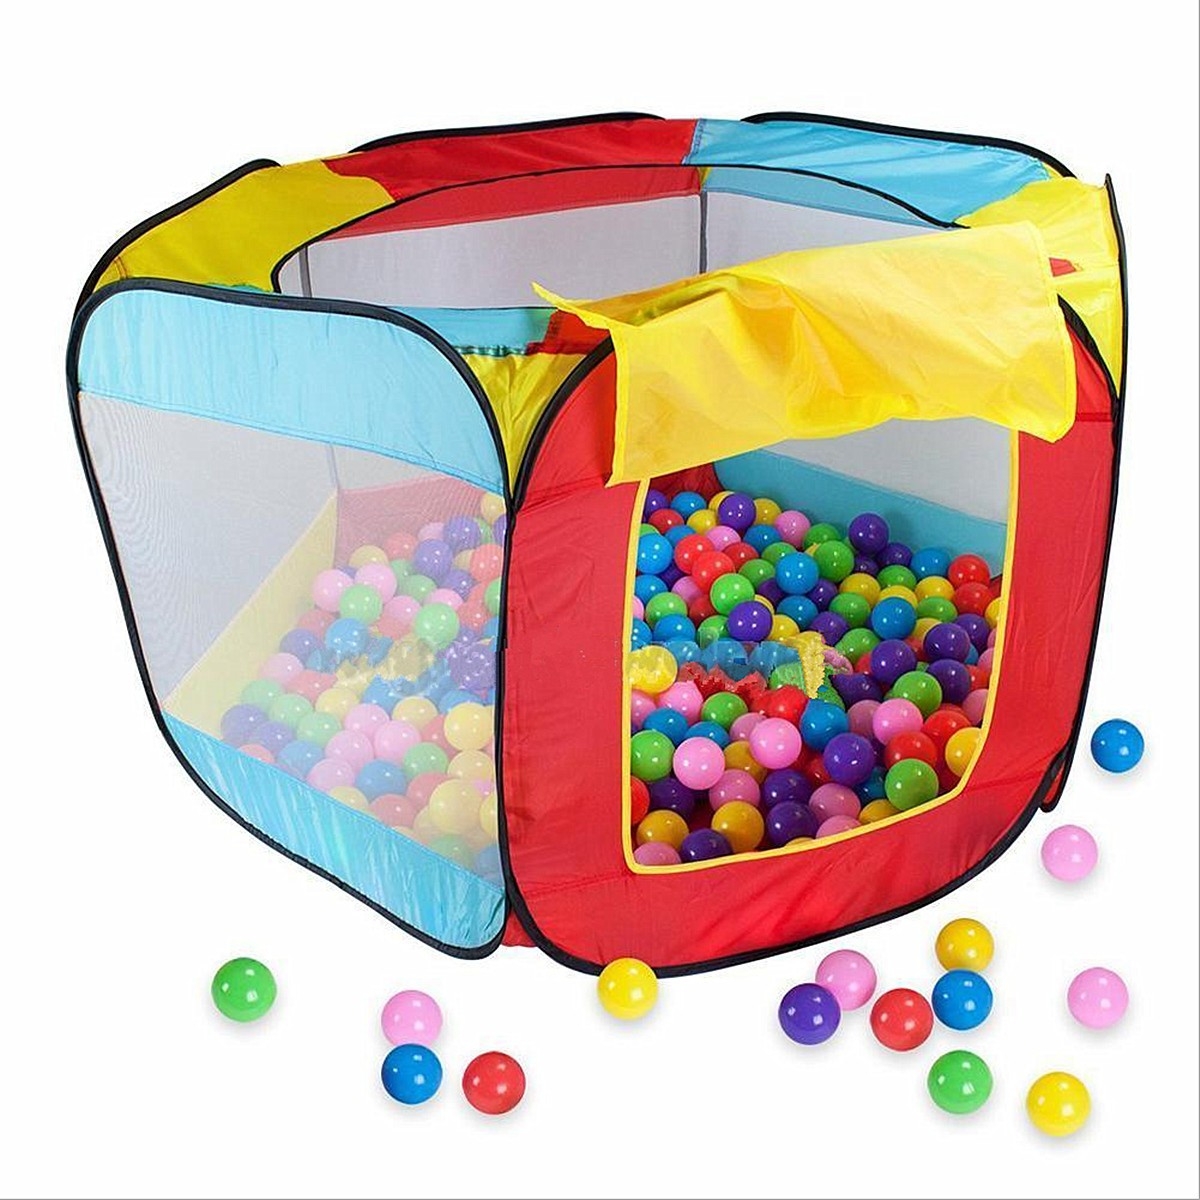 Kids Play House Indoor Outdoor Folding Ball Pit Hideaway Tent Play Hut 